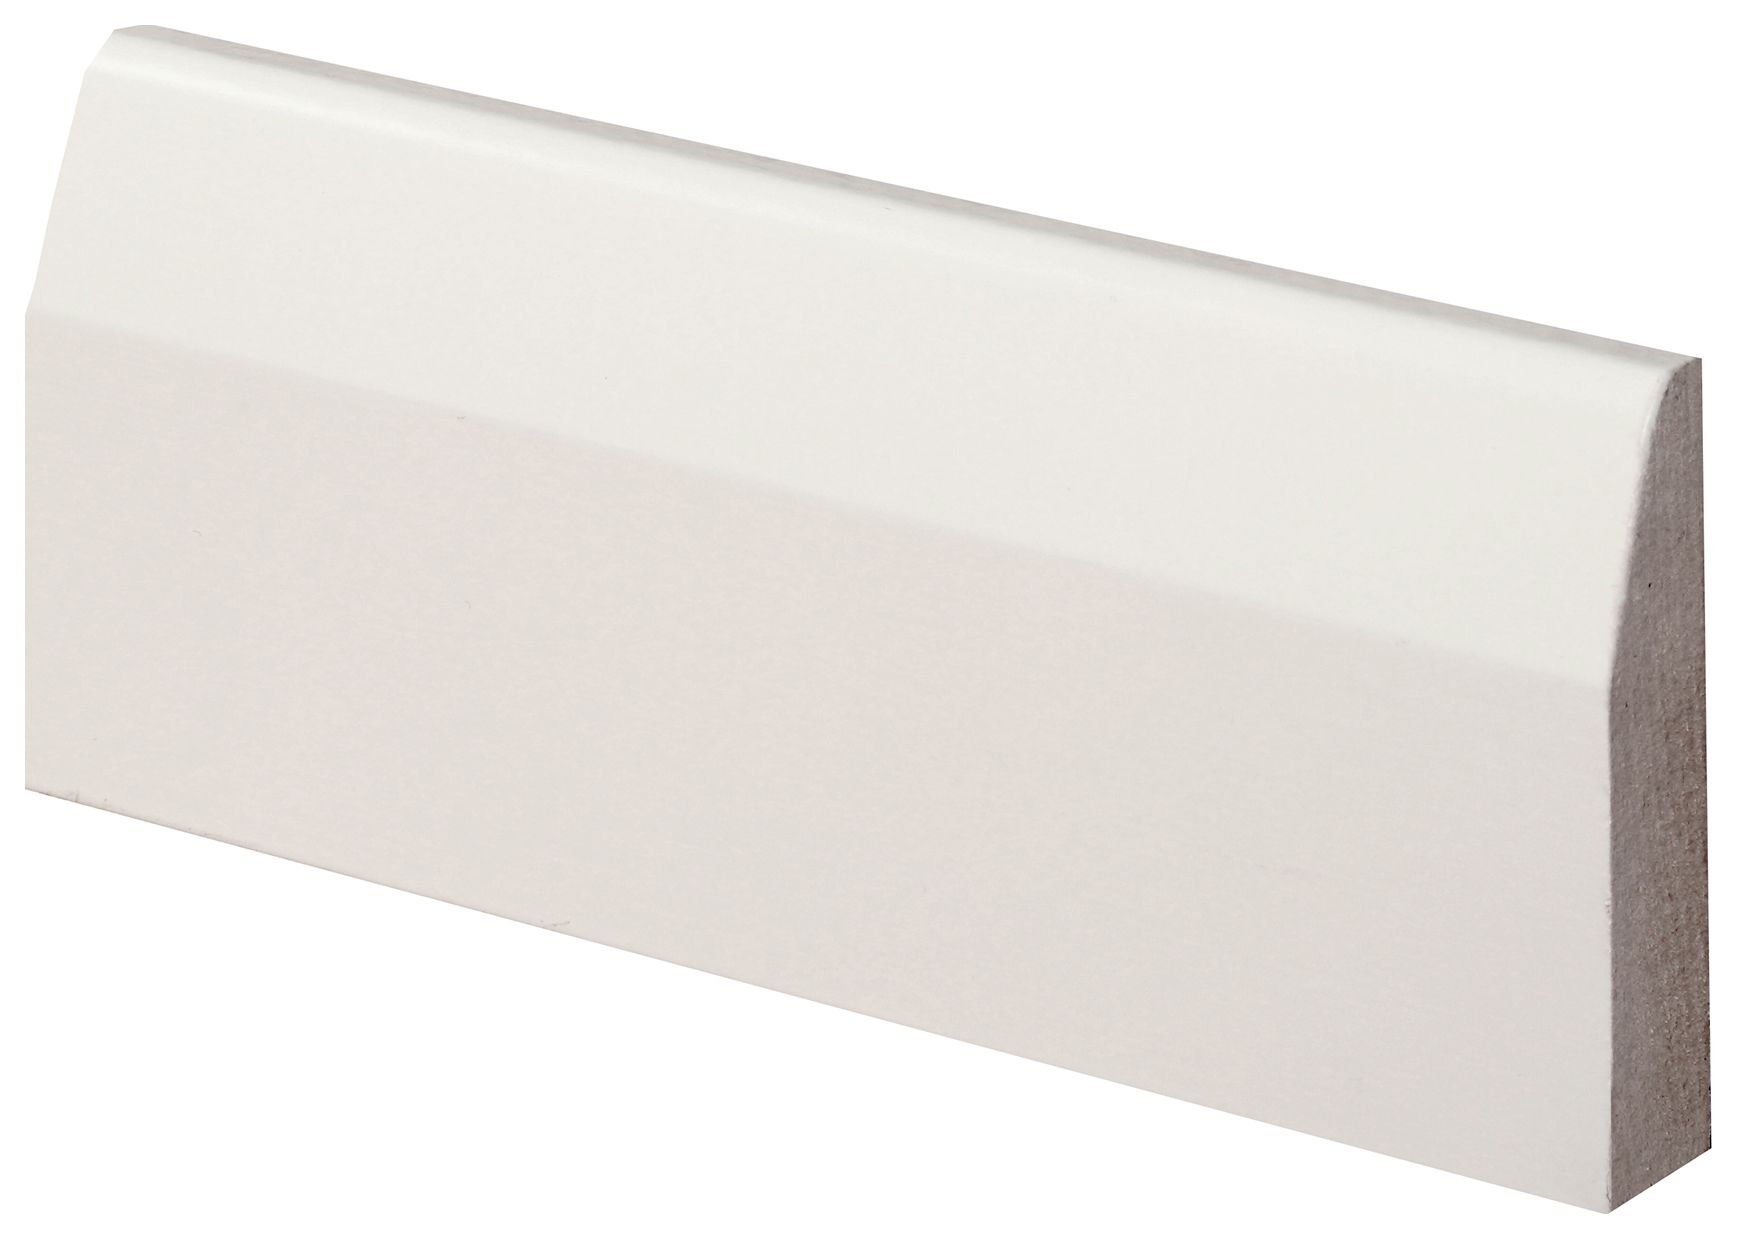 Image of Wickes Chamfered Fully Finished Architrave - 18 x 69 x 2100mm